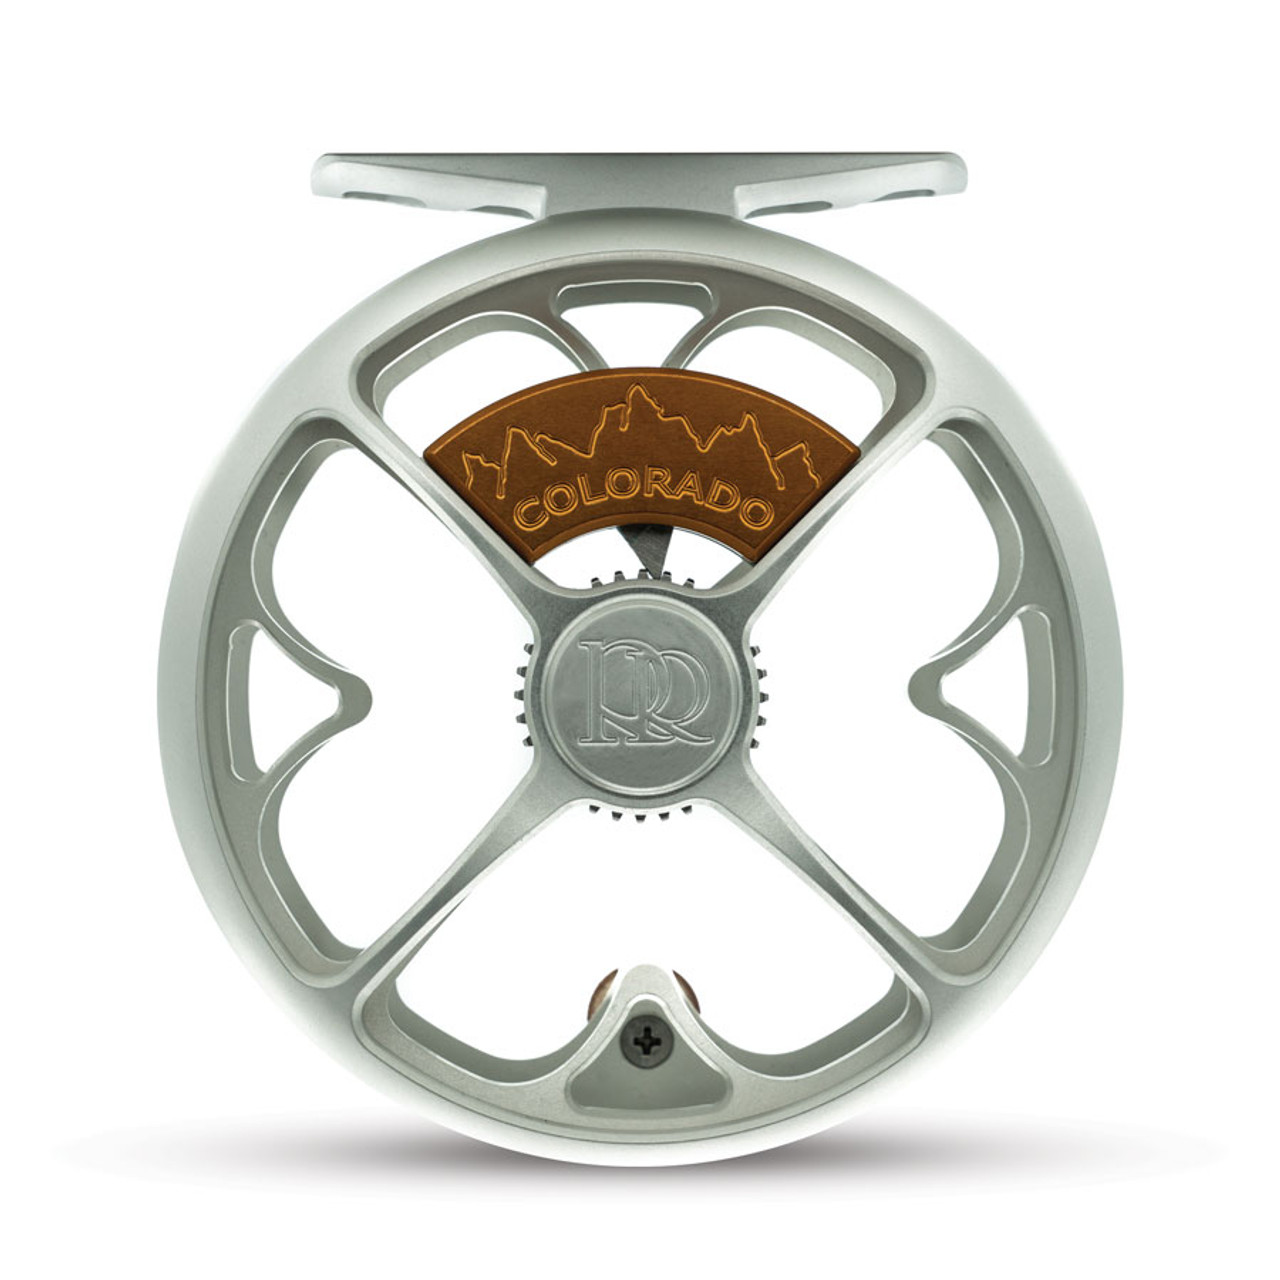 Ross Colorado Fly Reel - Made in USA - Ed's Fly Shop